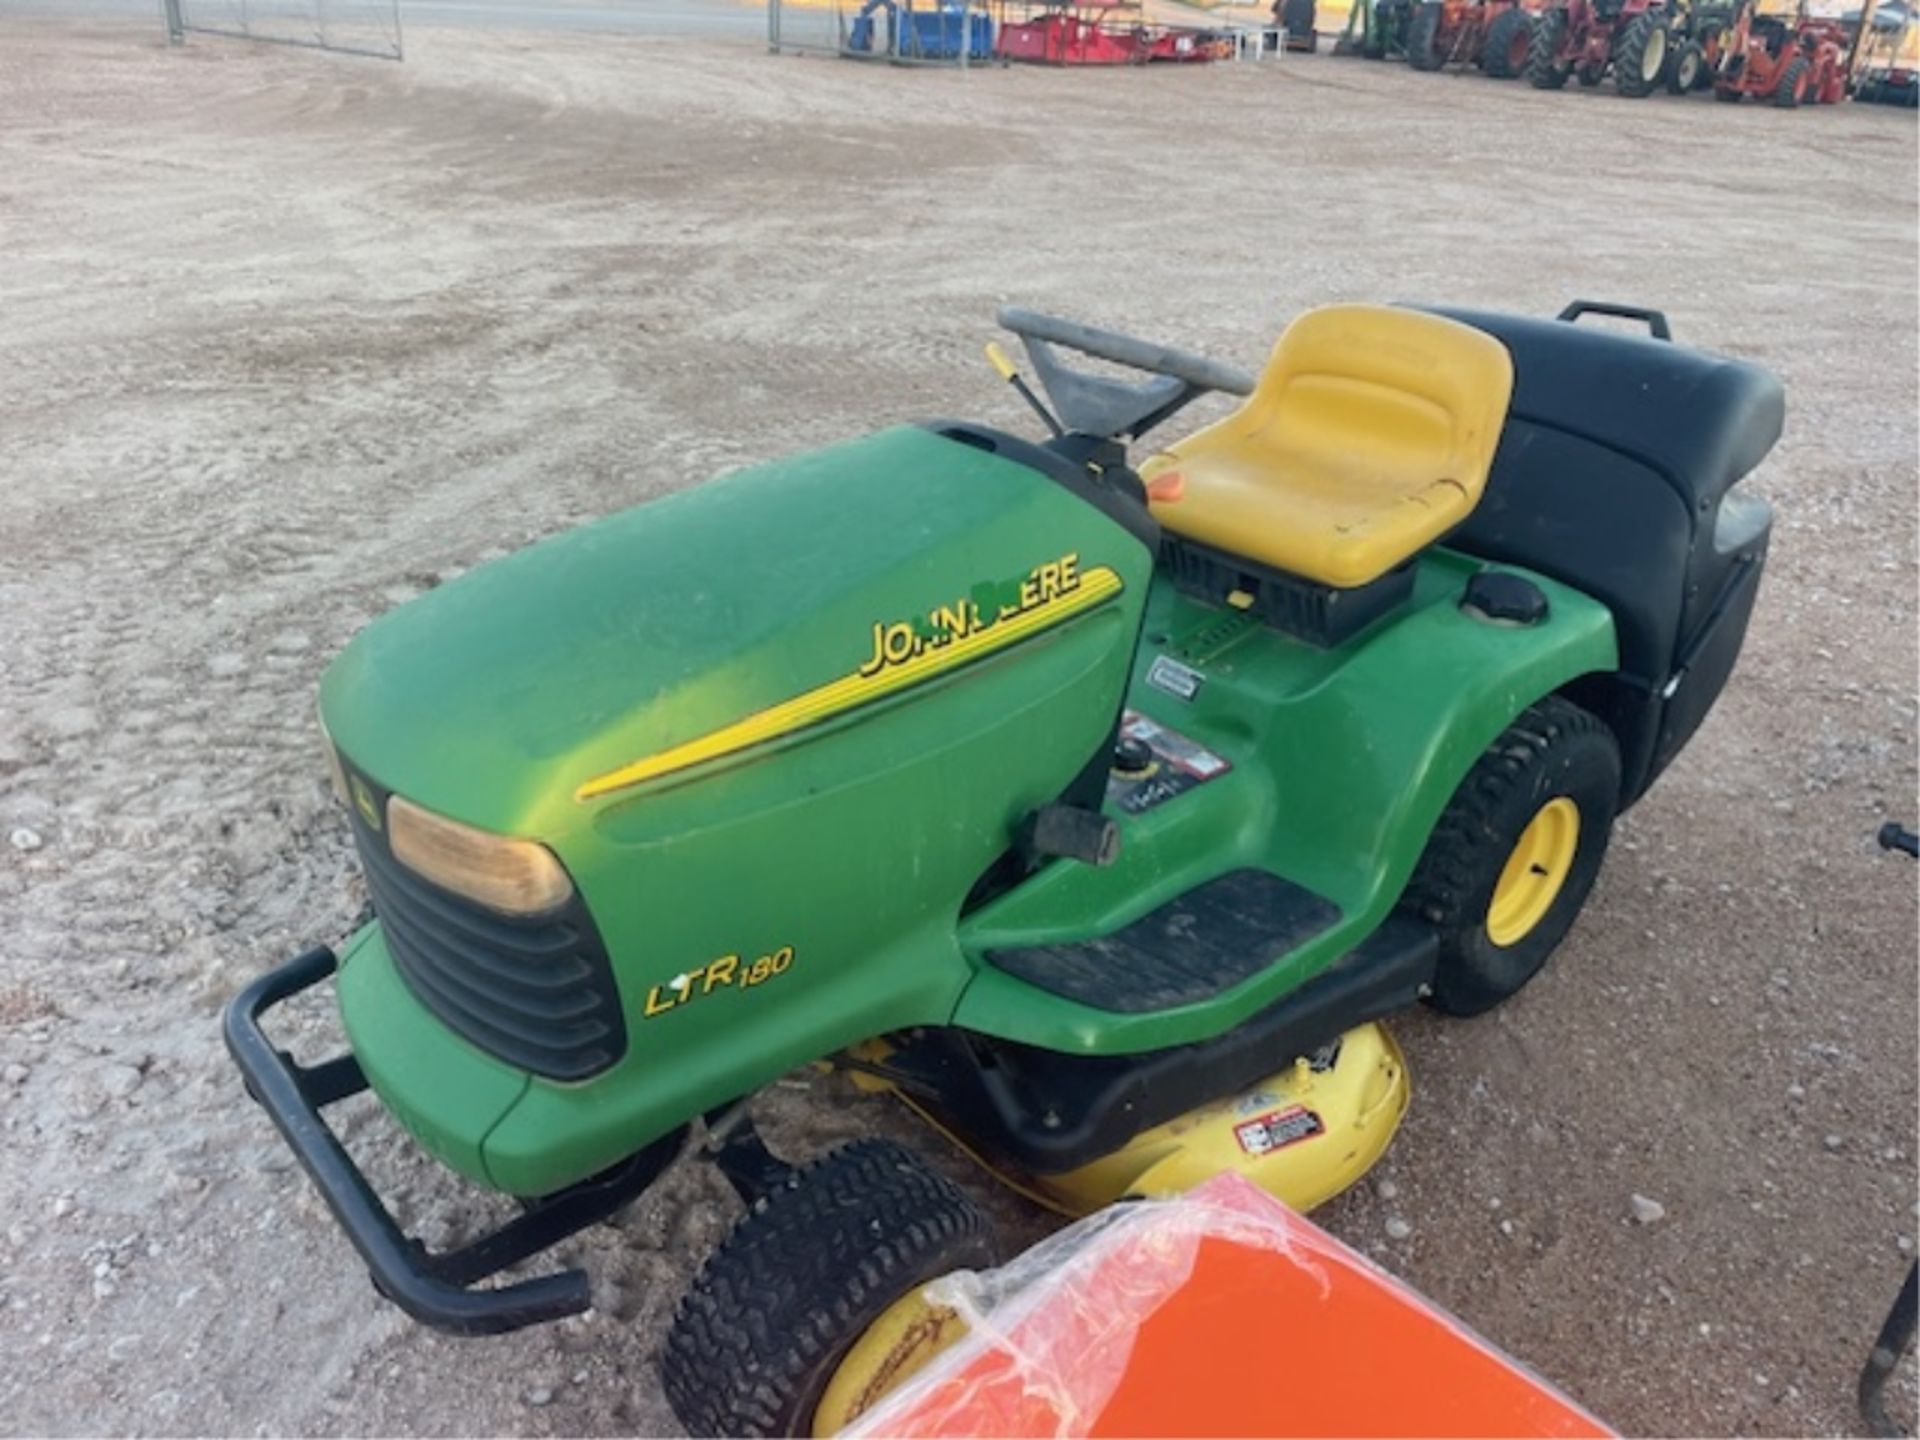 JD LTR180 riding mower - Image 2 of 3